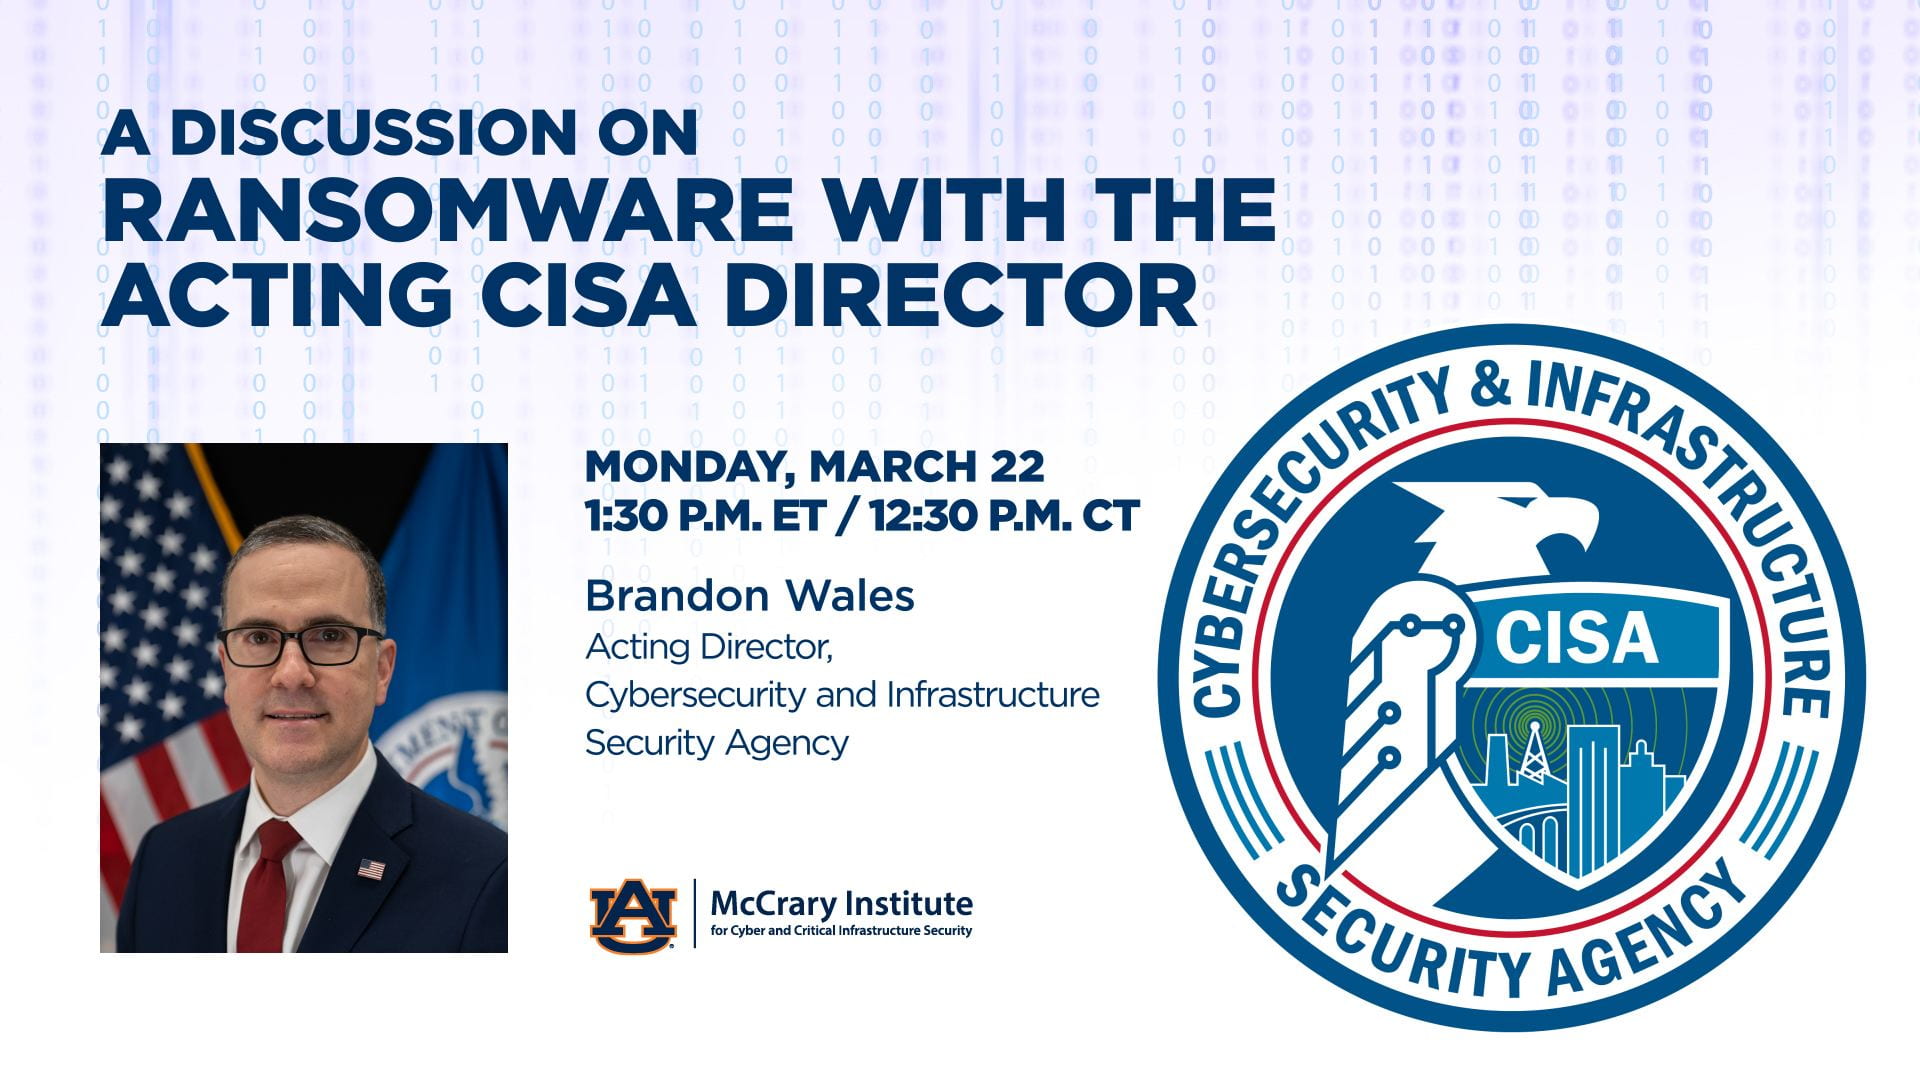 A Discussion on Ransomware with the Acting CISA Director